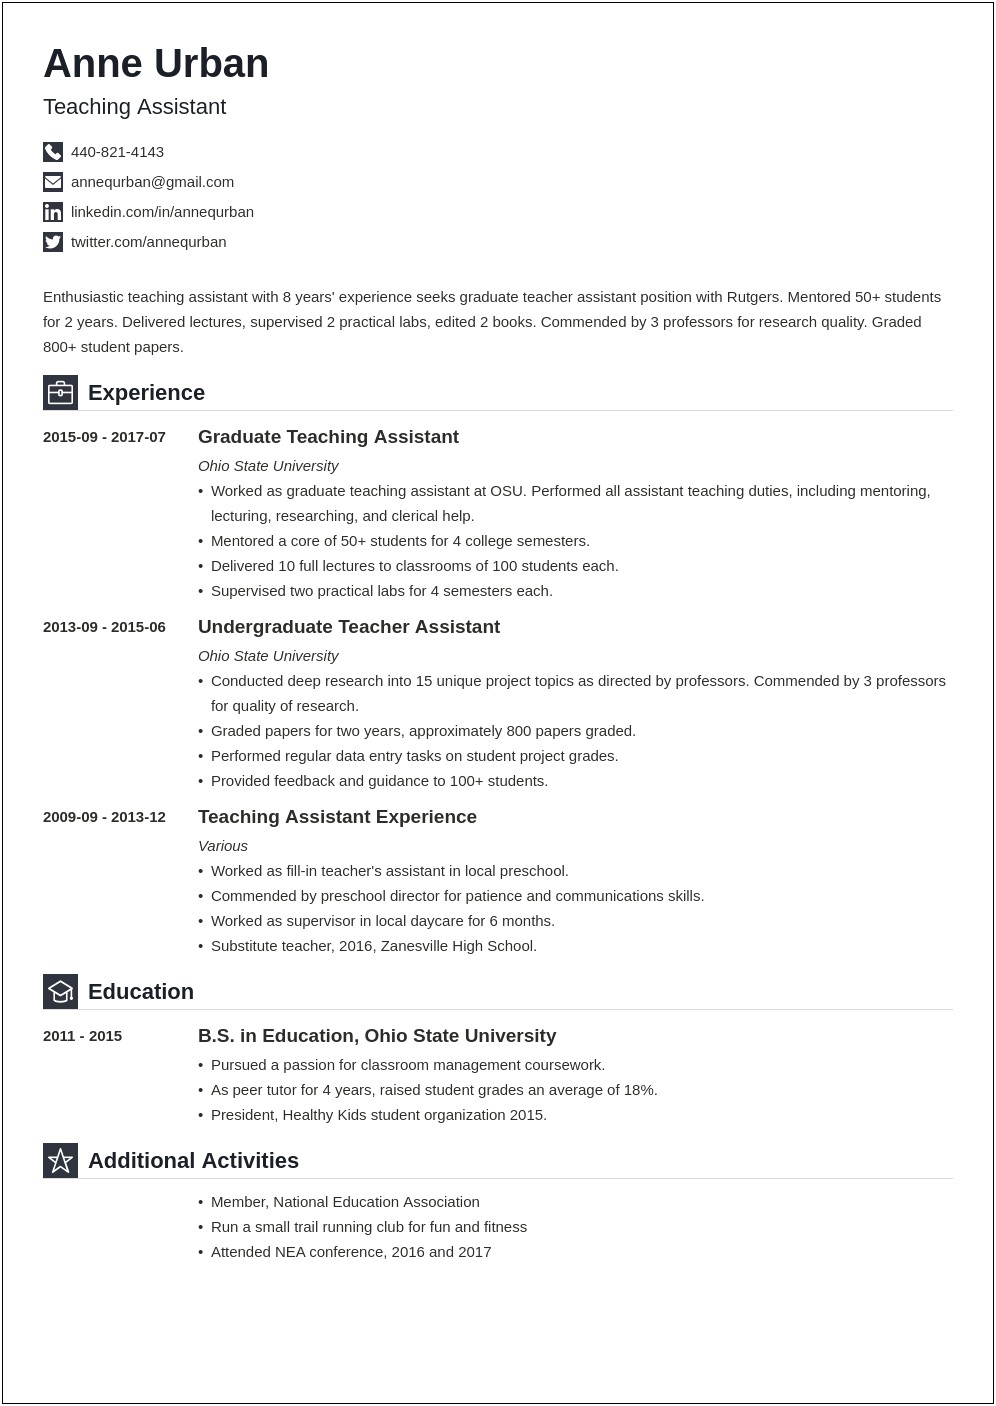 Skill For Teachers Aide On A Resume